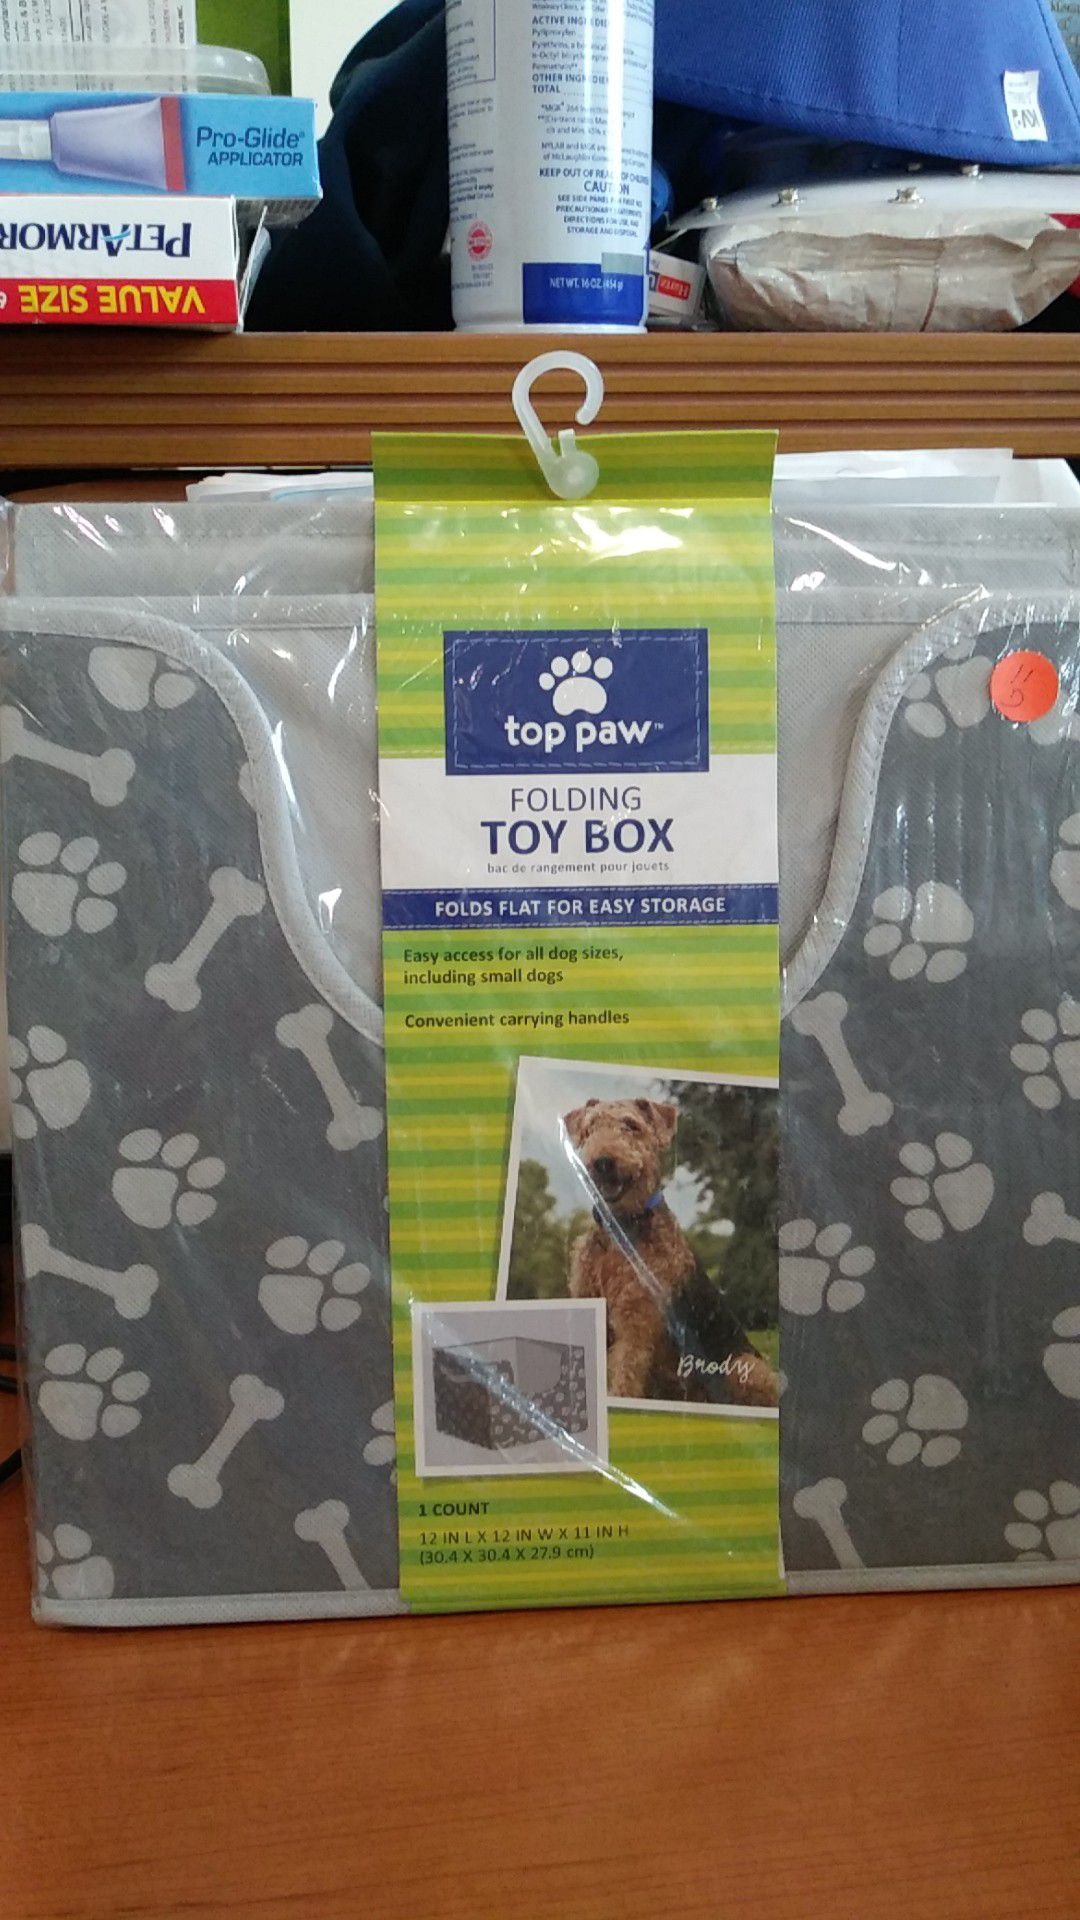 Folding toy box for pets